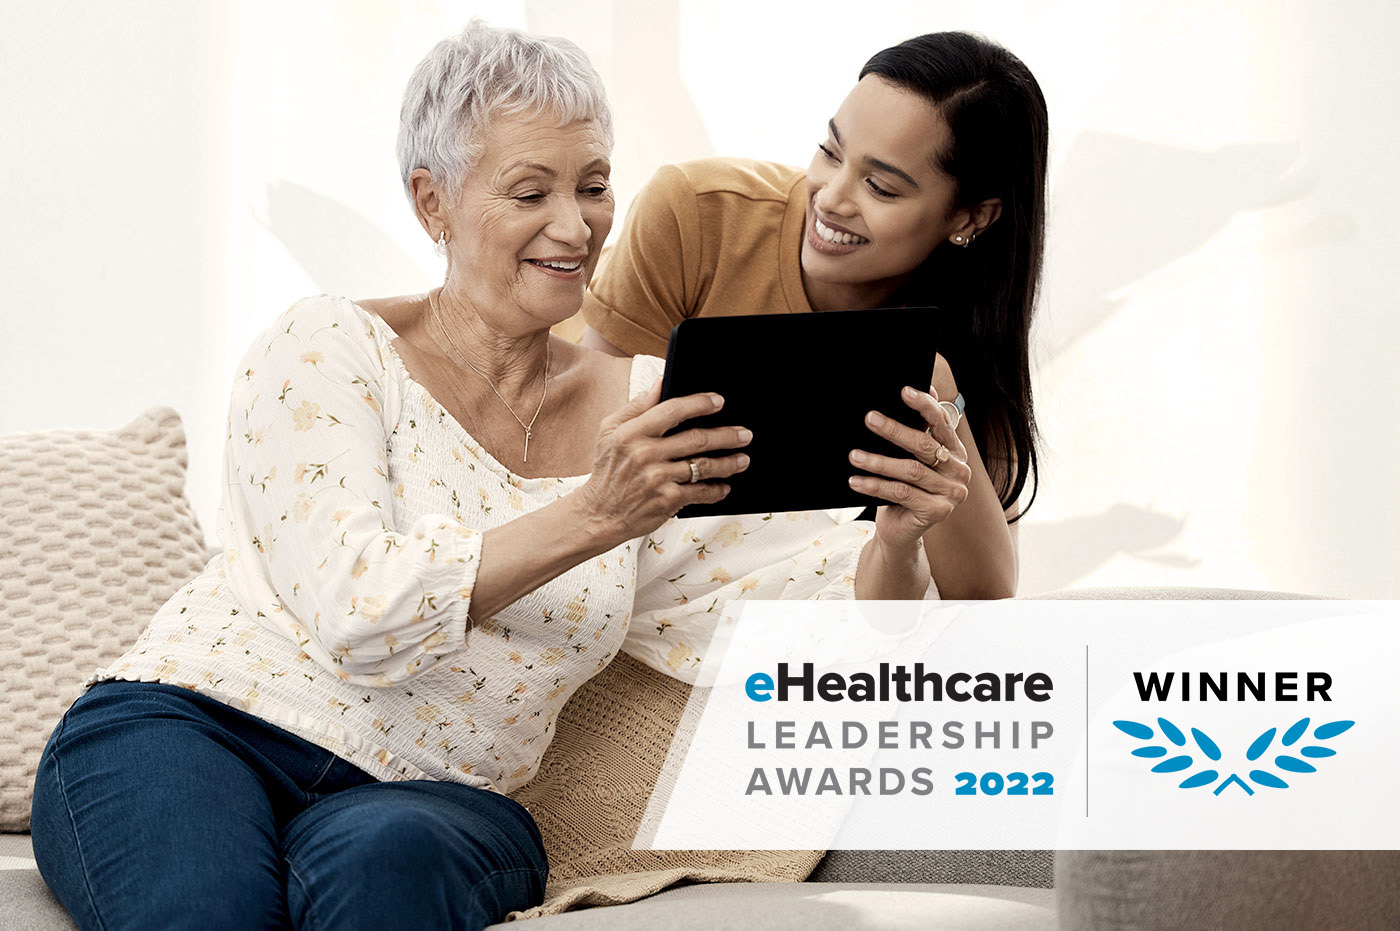 A healthcare worker and older woman looking at a tablet. EHealthcare leadership awards badge in corner.